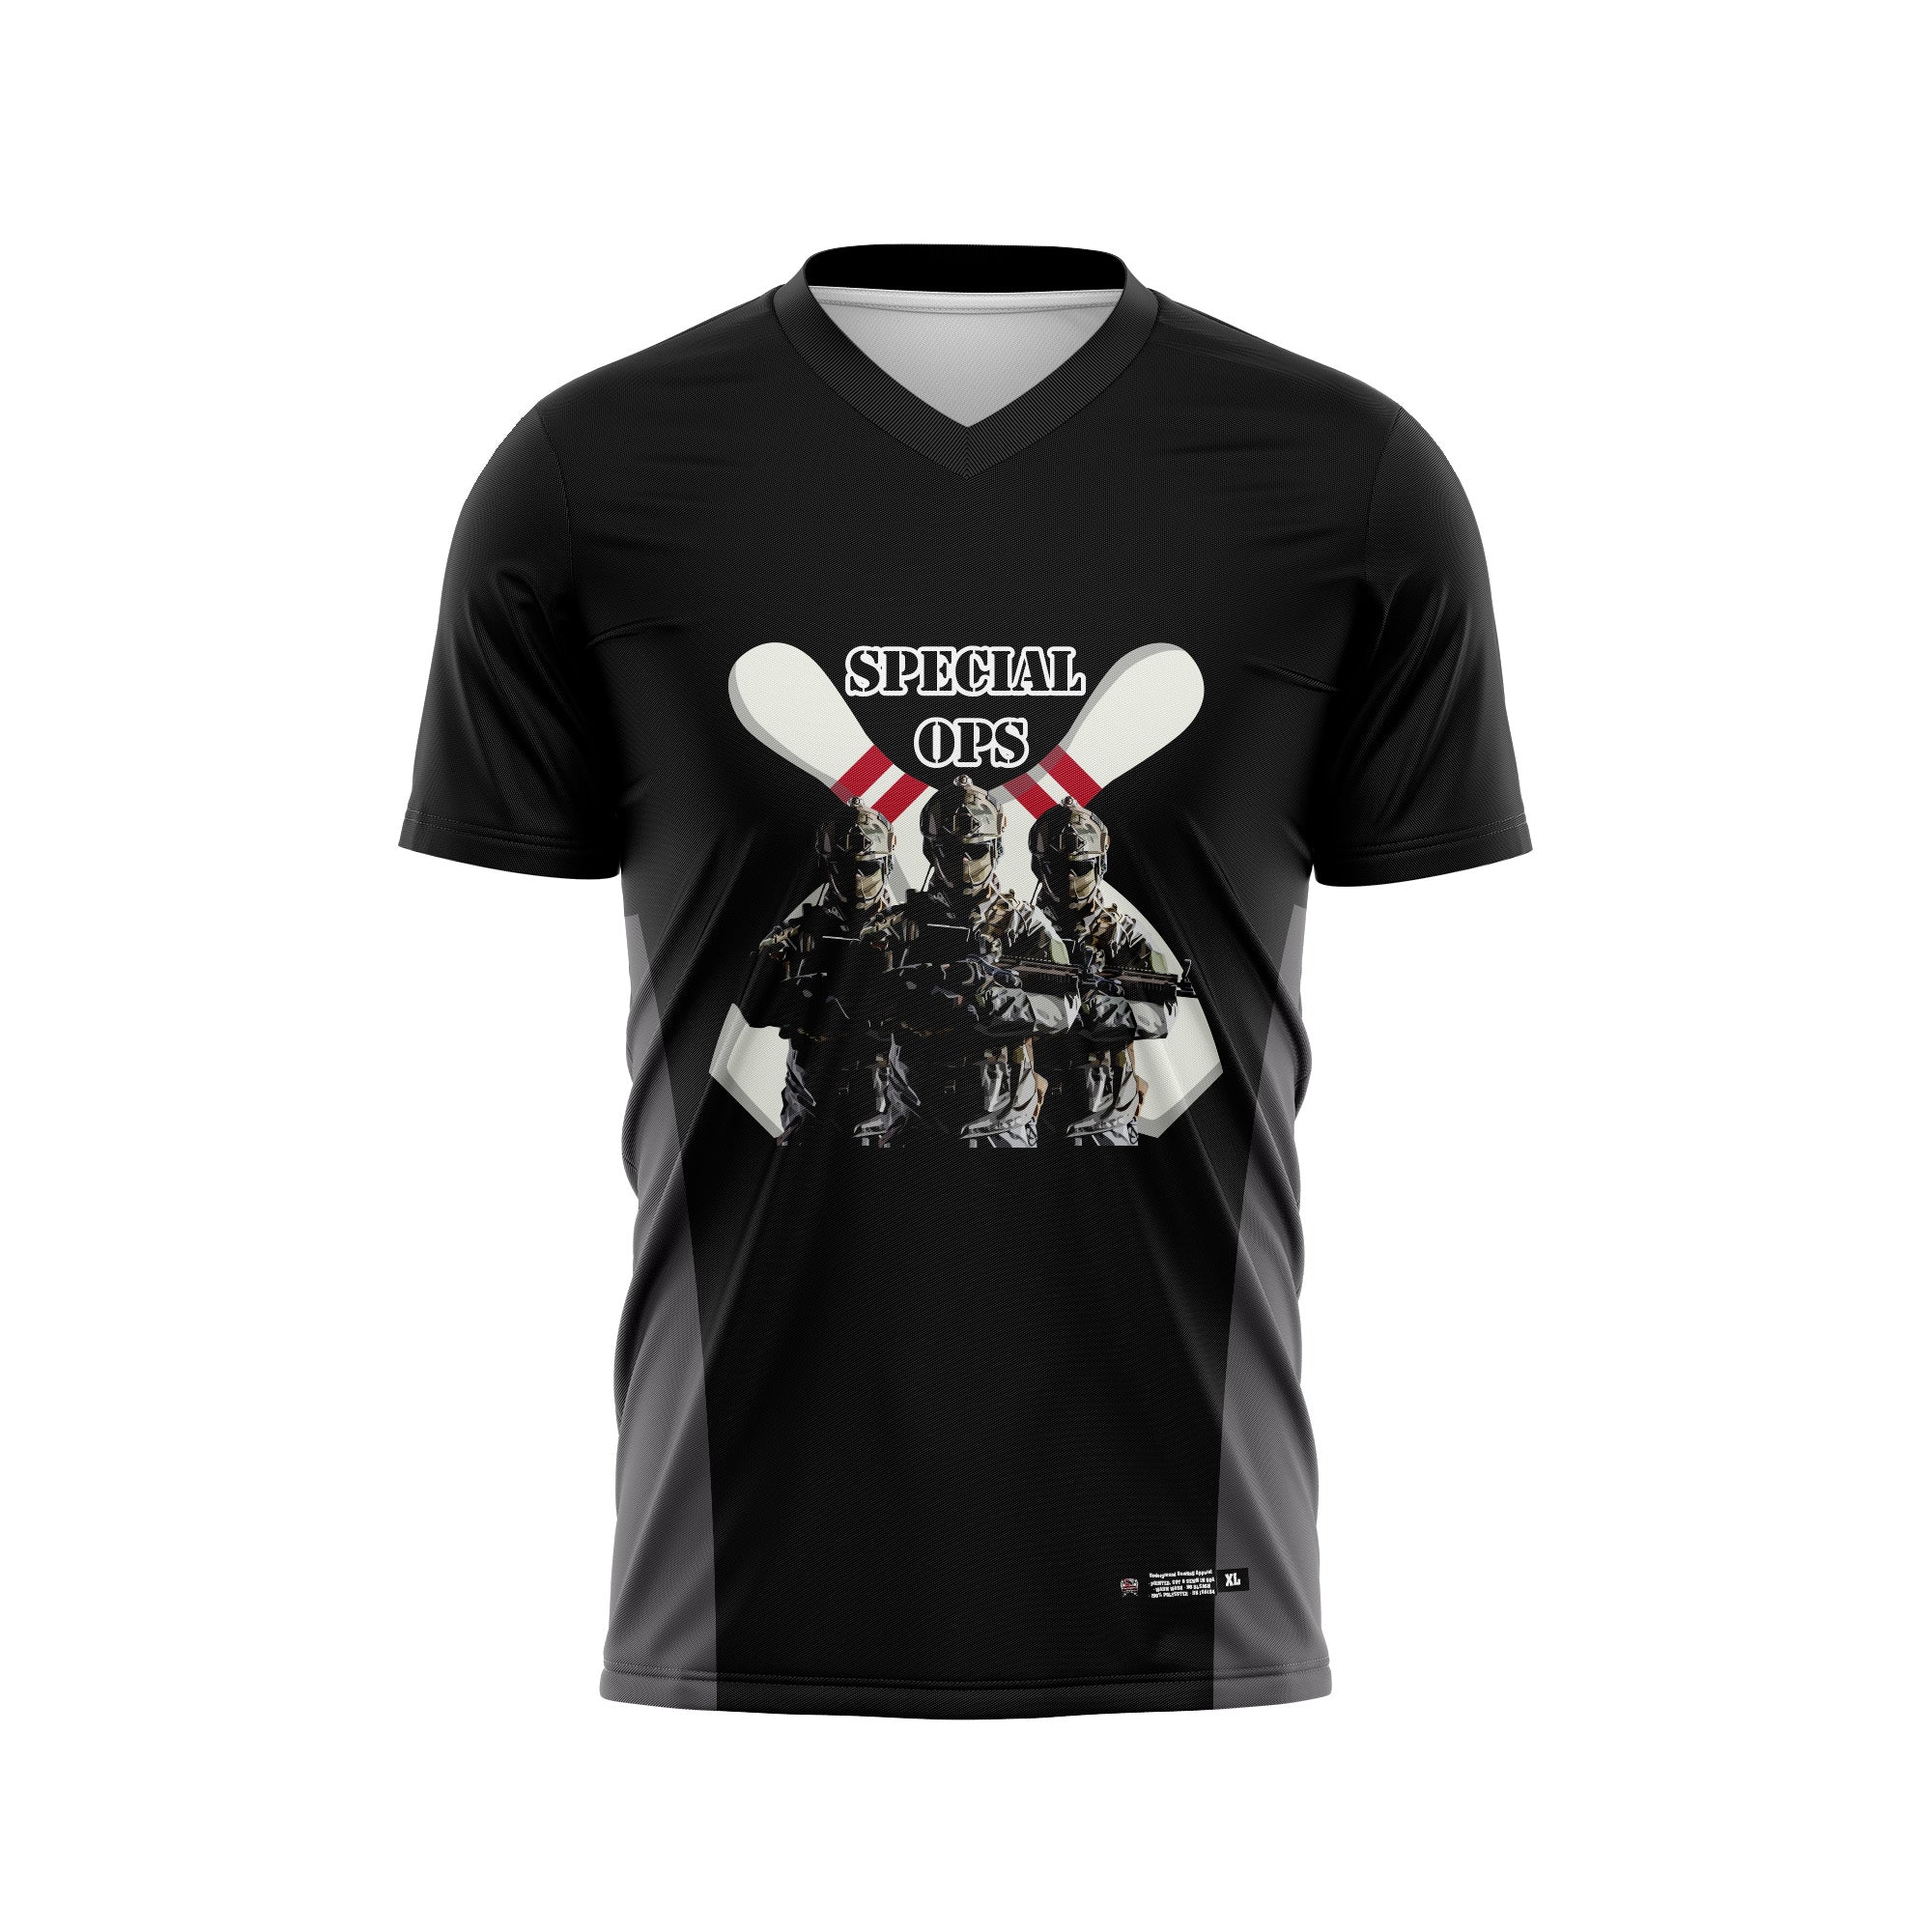 Special Ops Black / Gray Jersey